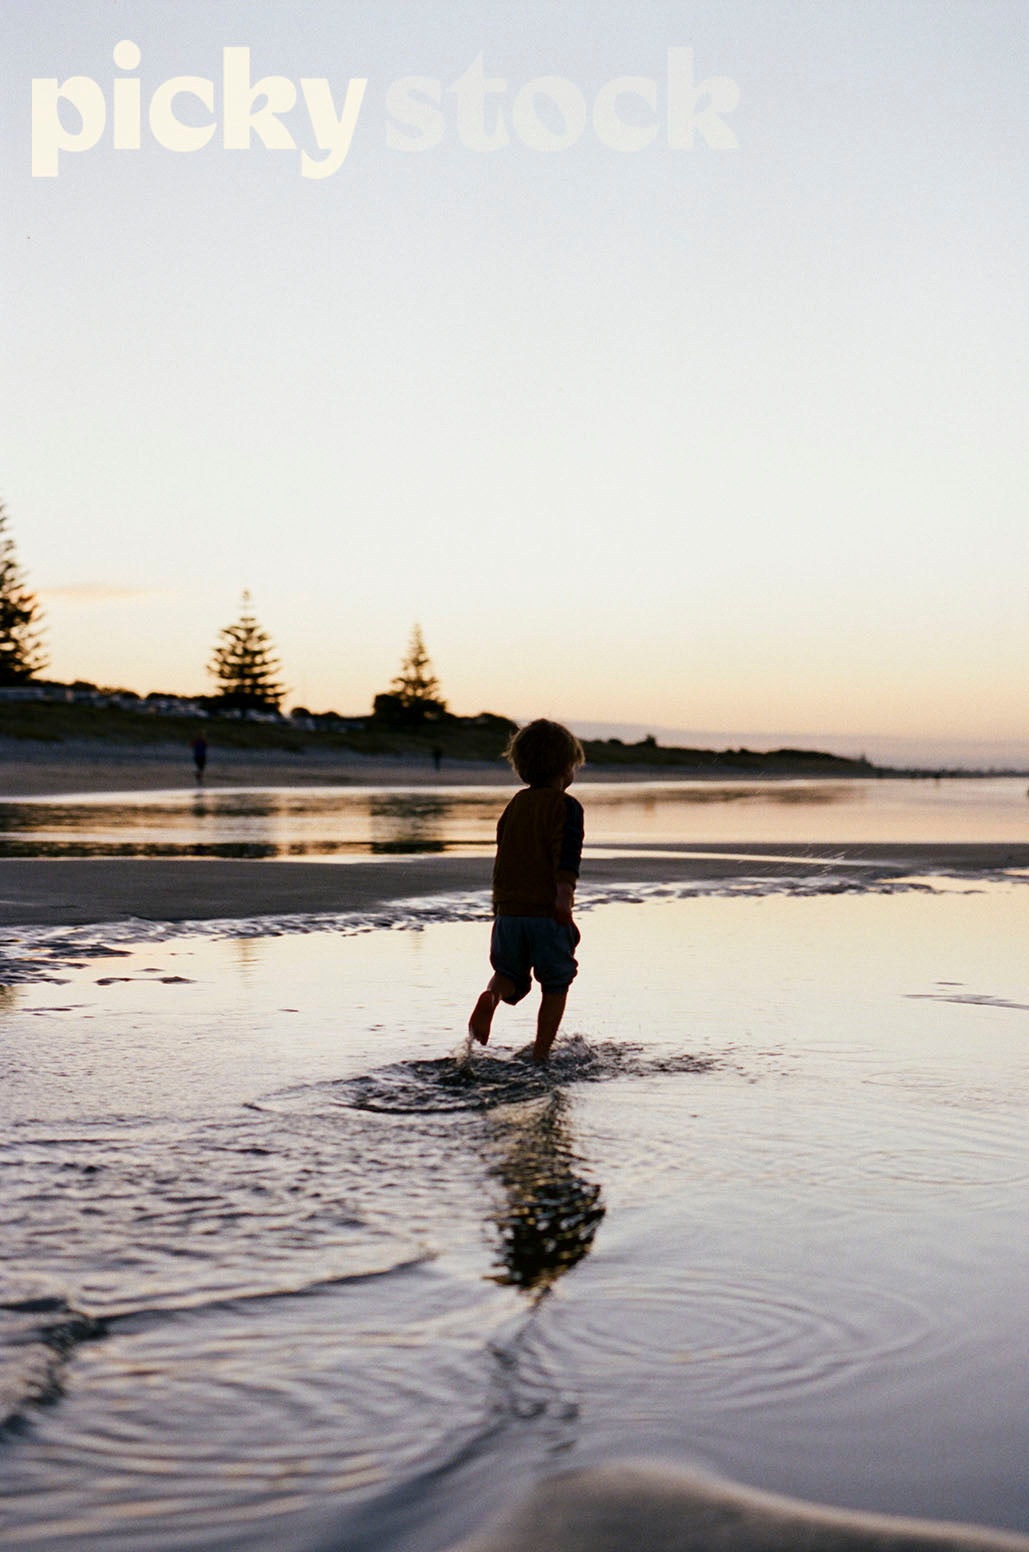 Small blonde boy running through water at low tide at sunset. Reflections of boy on the water. Large trees in the distance.